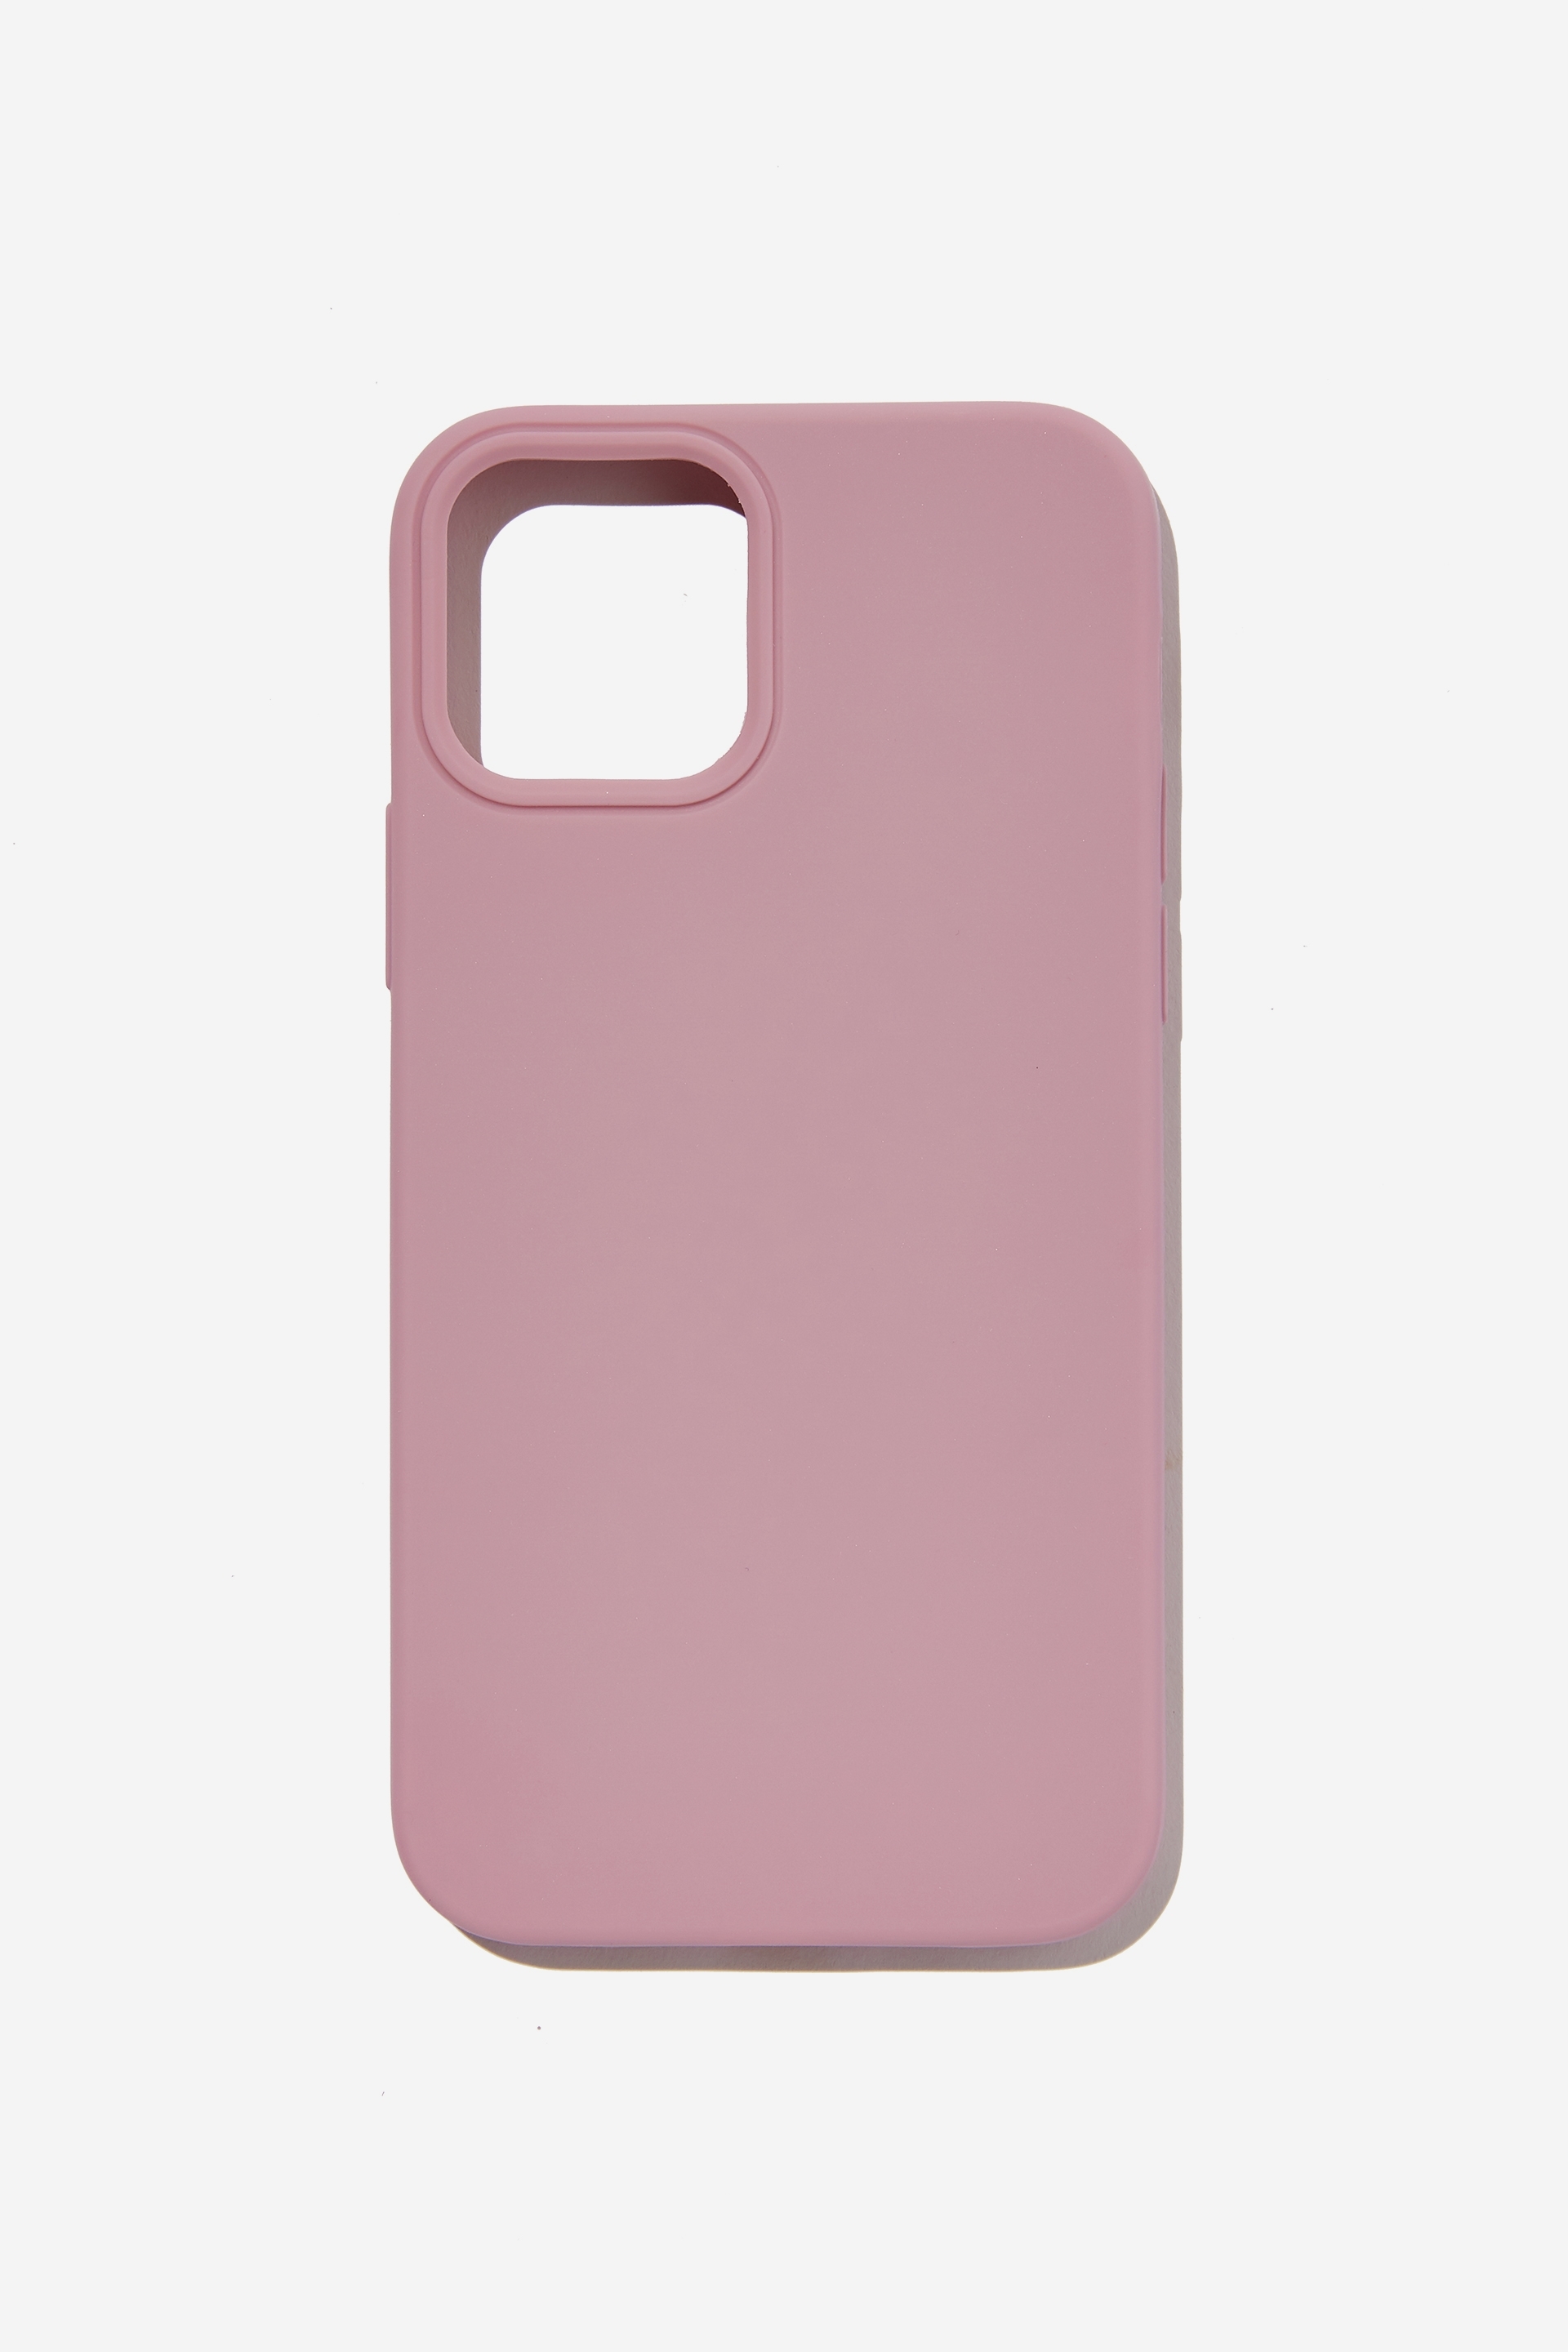 Typo - Recycled Phone Case Iphone 12, 12 Pro - Dusty lilac